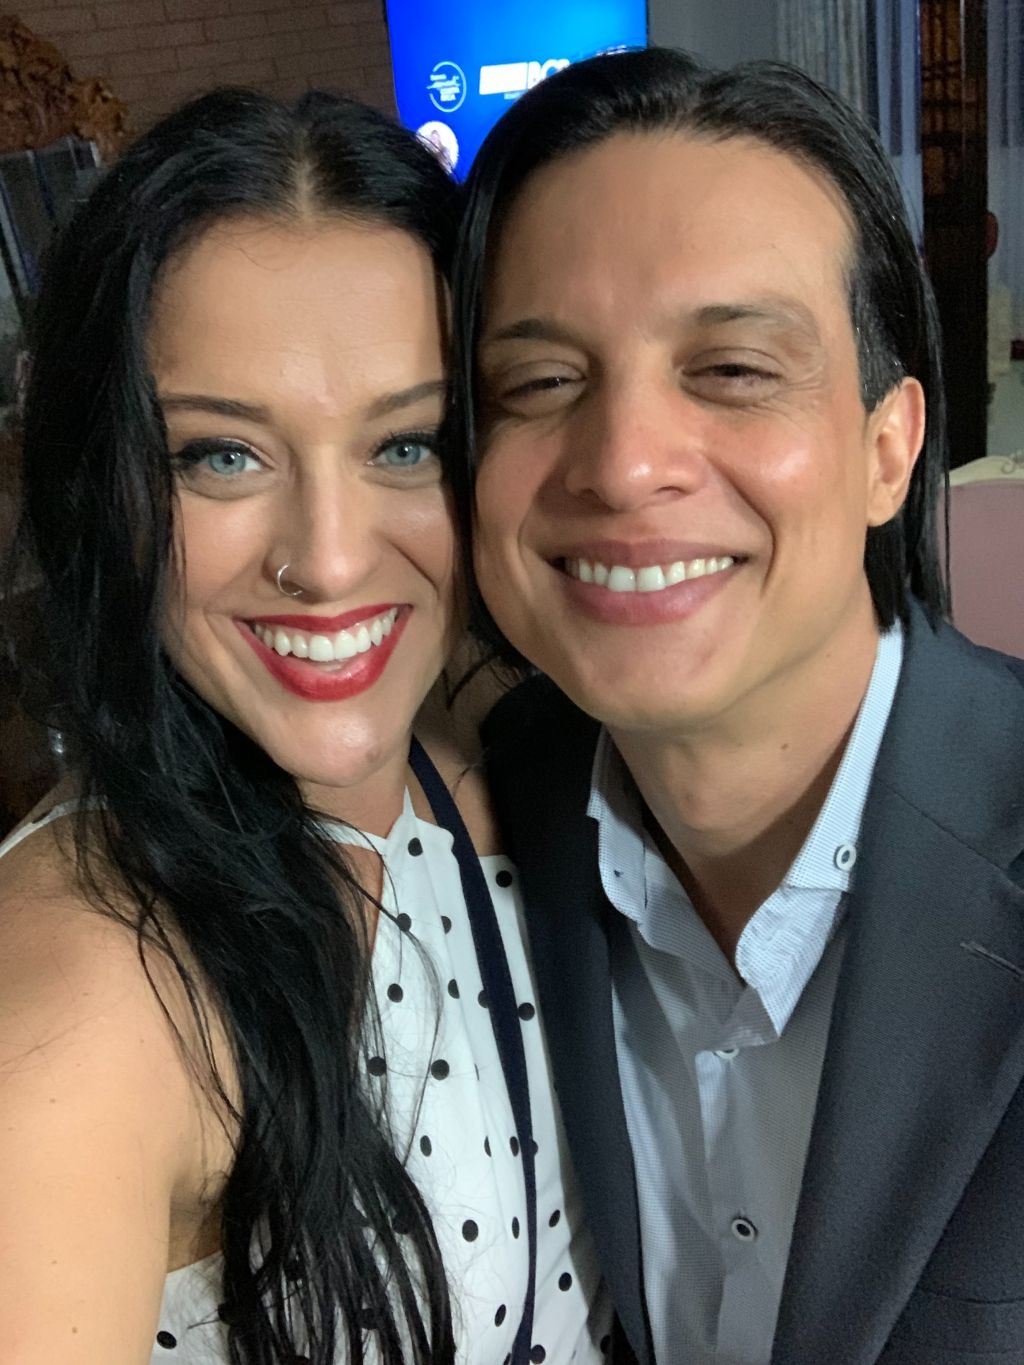 A beautiful White Christian woman and her Latino husband smile for a selfie